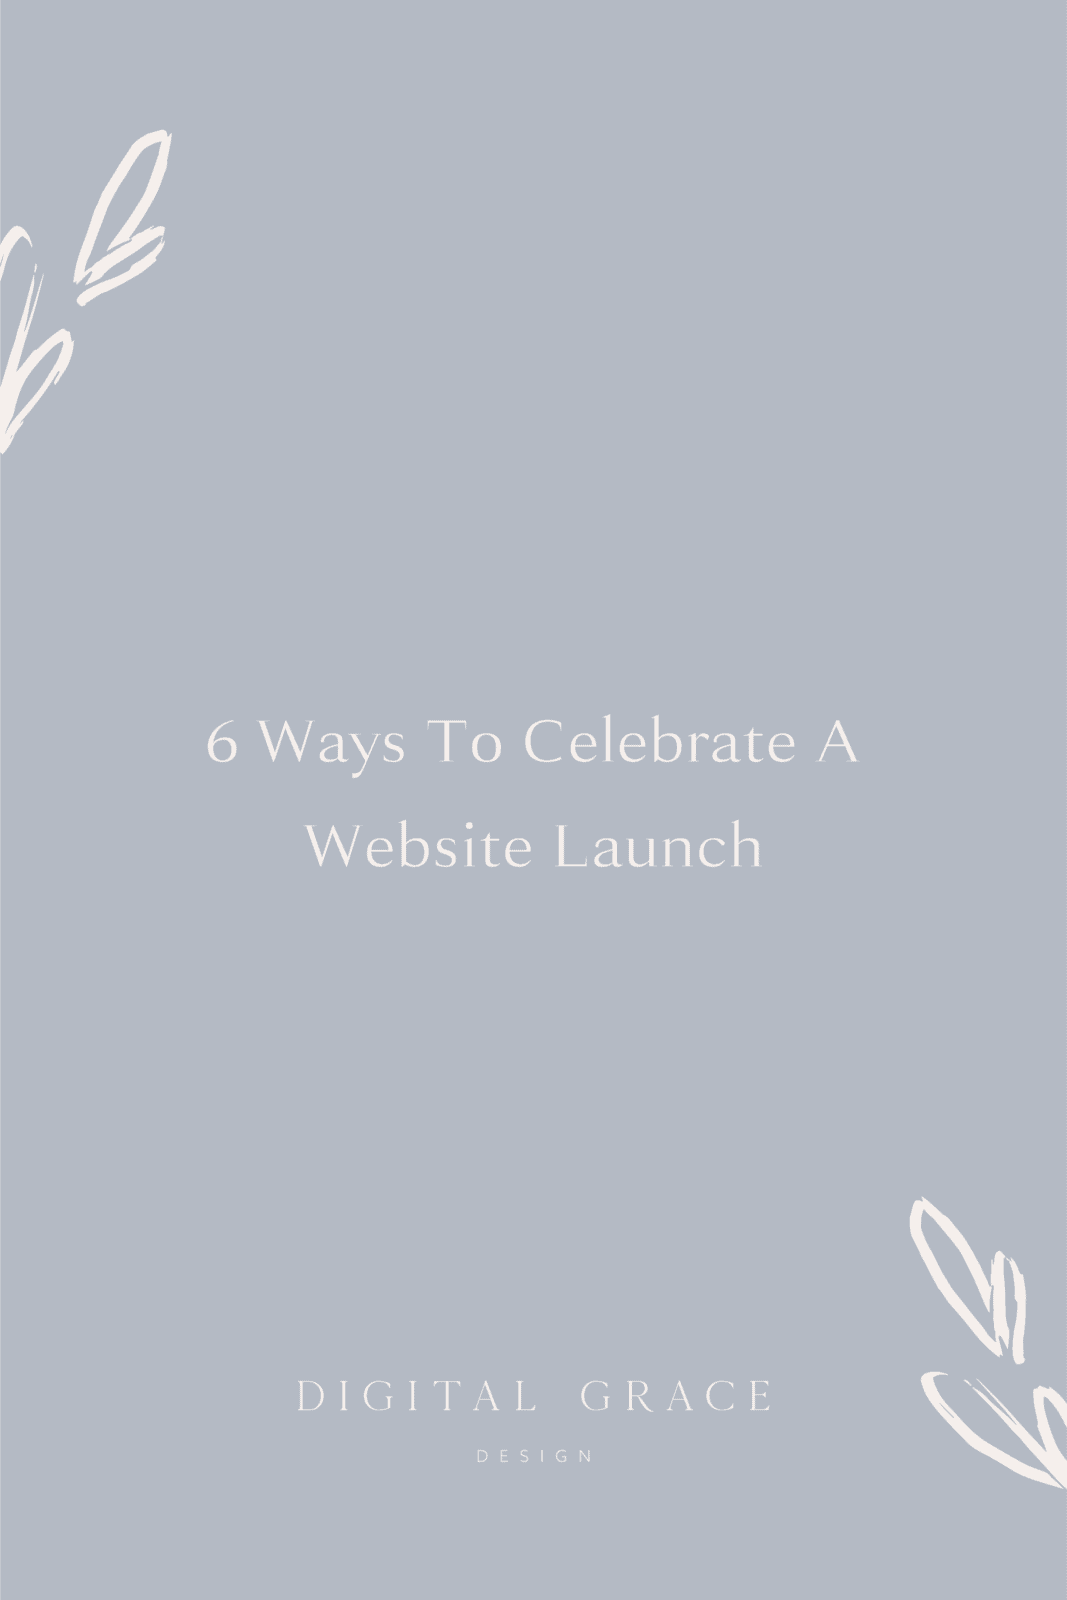 6 Ways to Celebrate a Website Launch